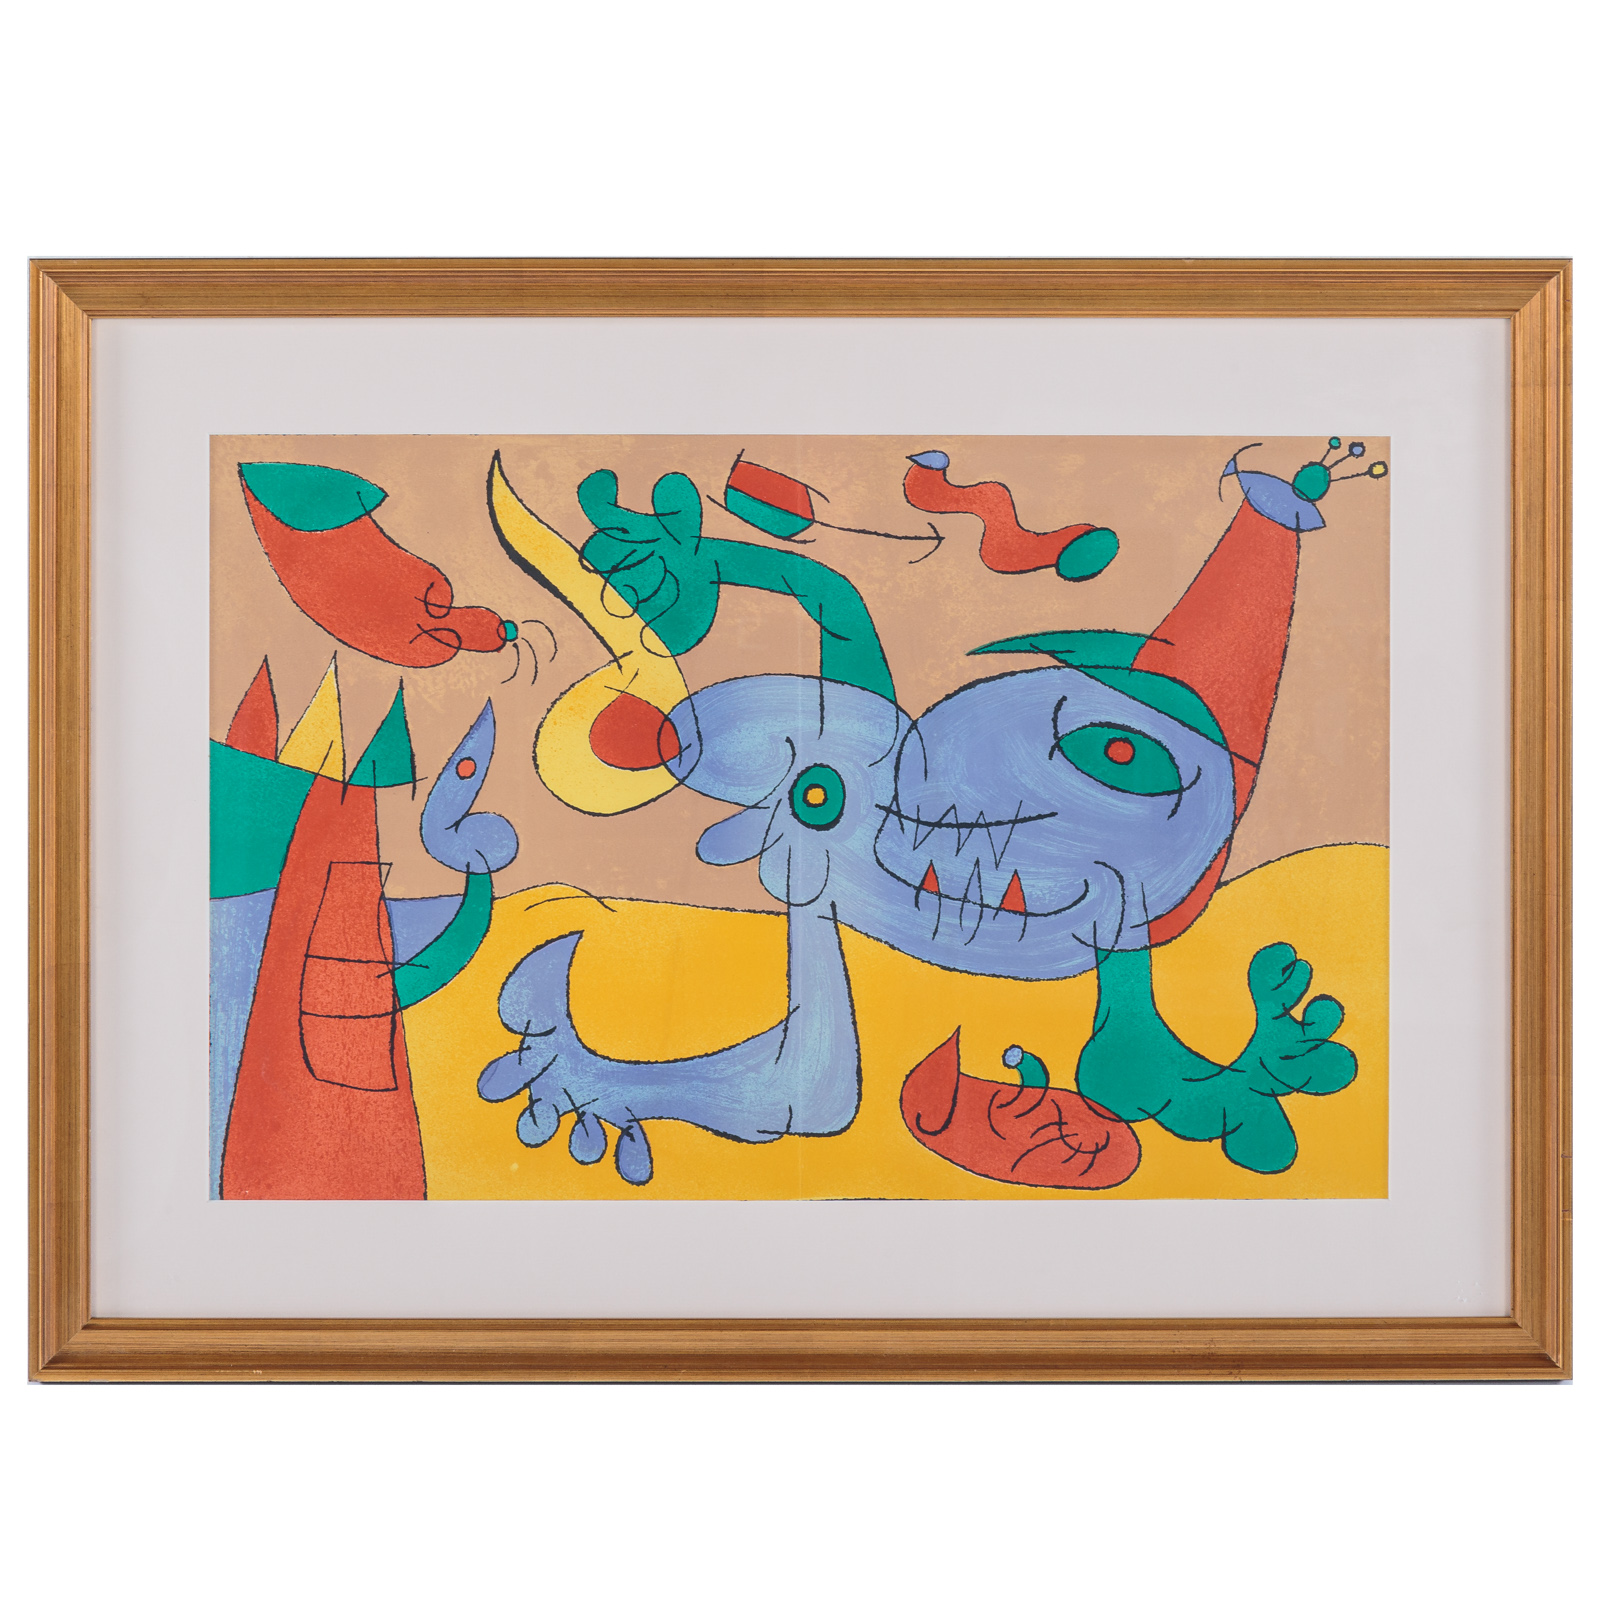 JOAN MIRO UNTITLED FROM THE UBI 288830